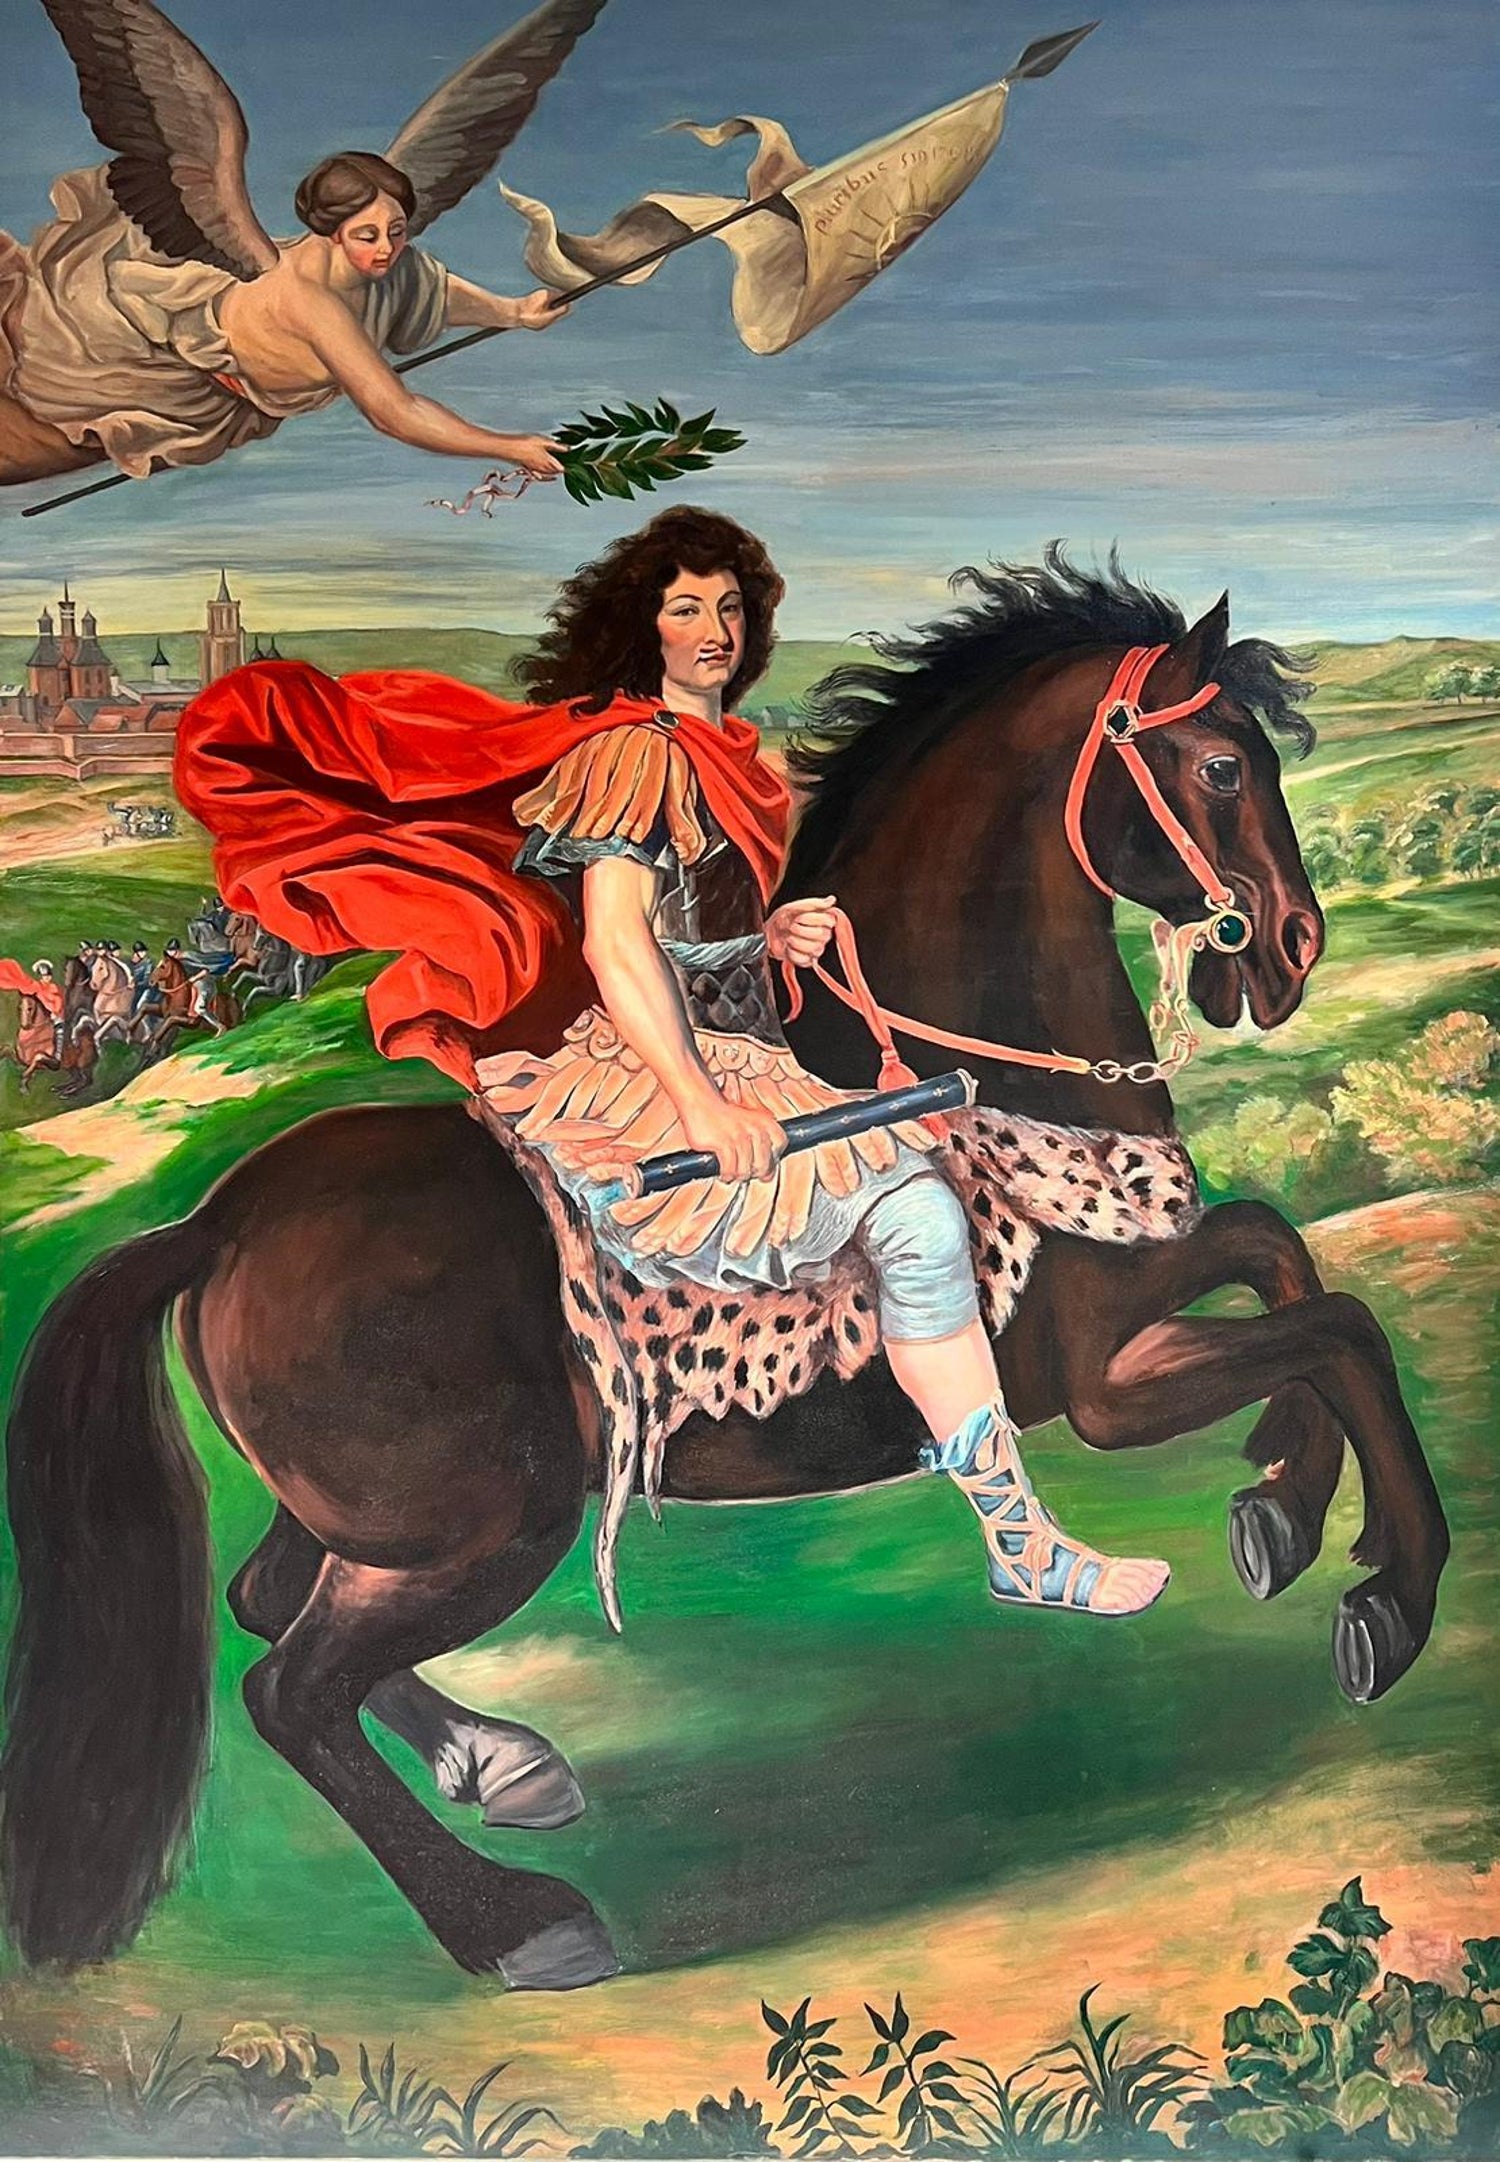 In Le Brun's equestrian portrait of King Louis XIV (1668) is there